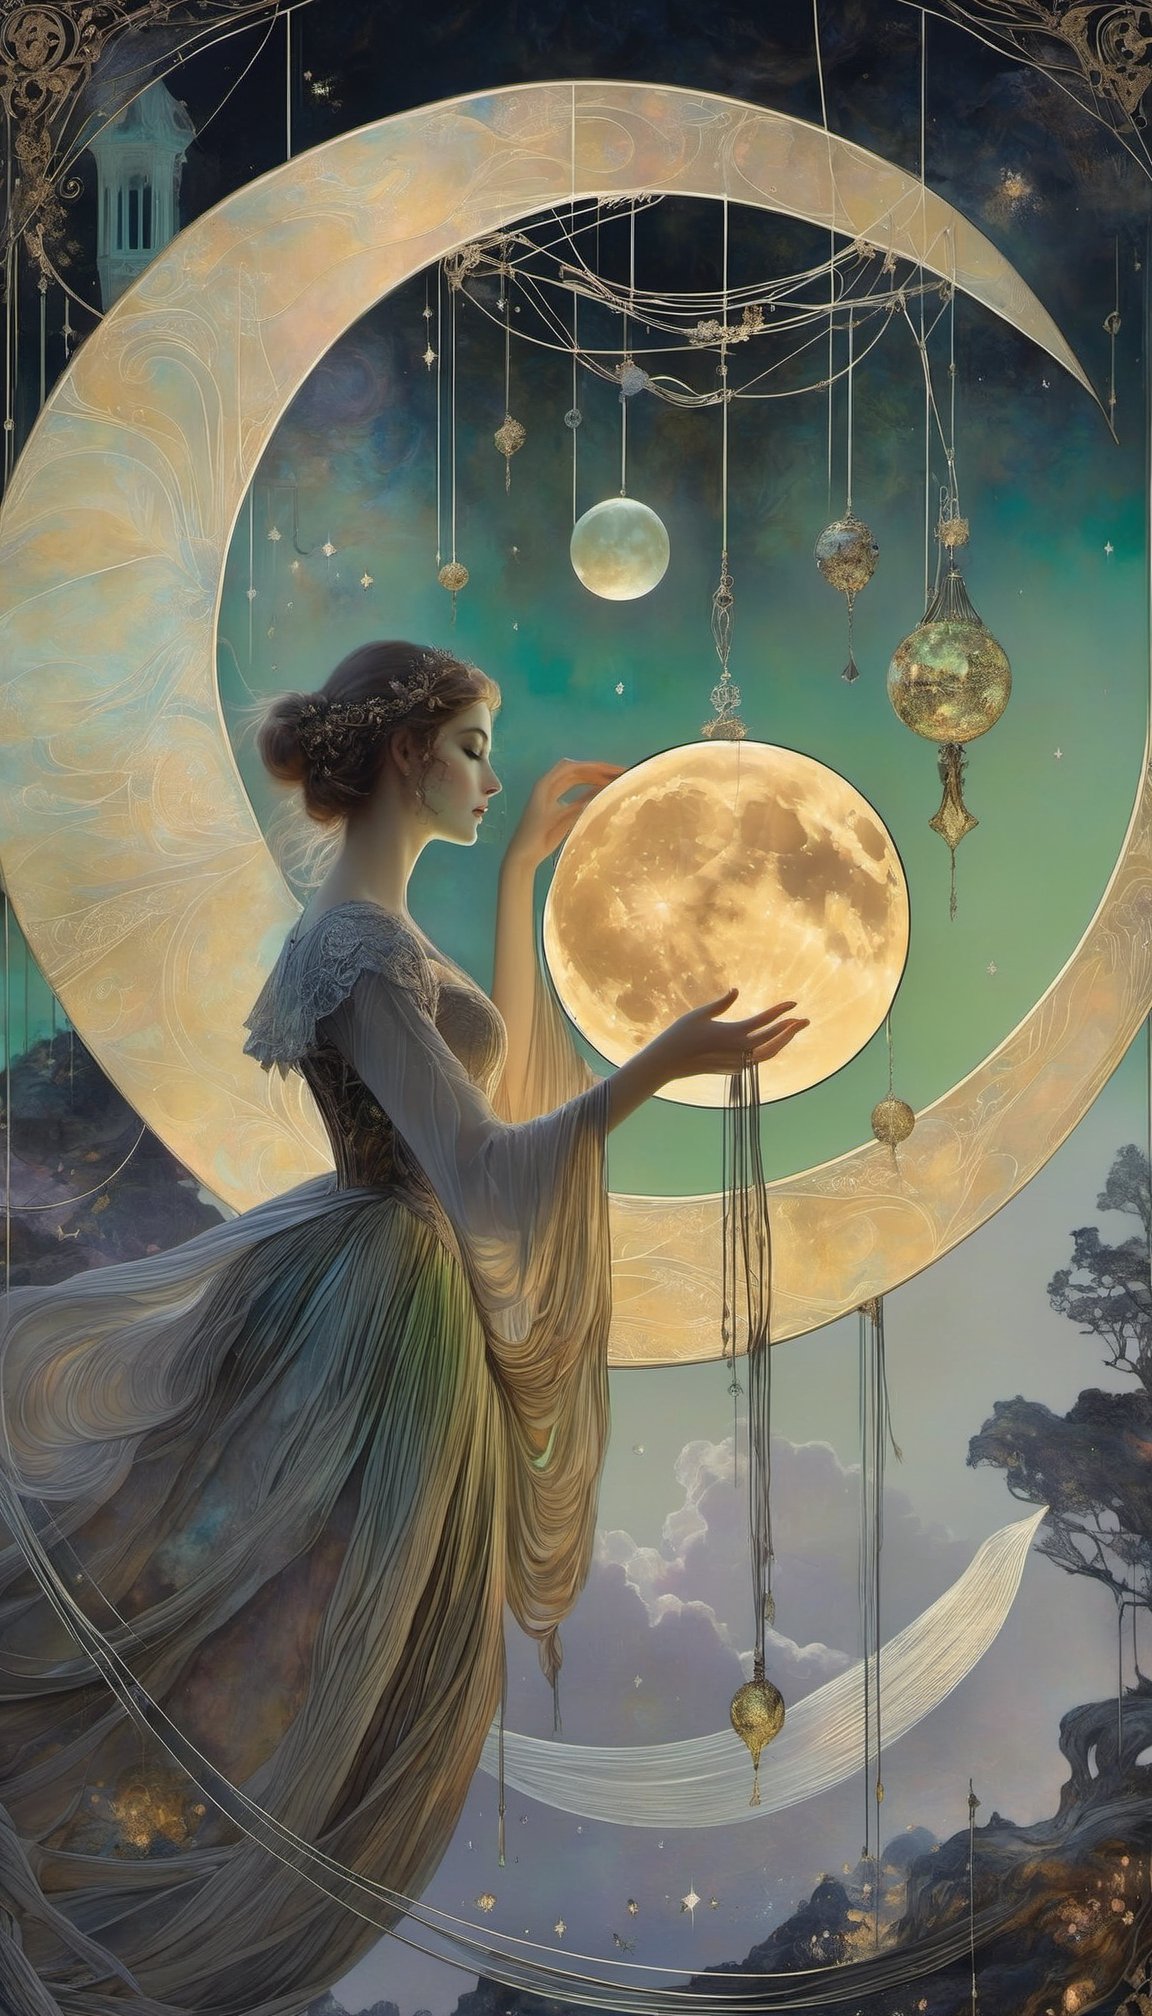  A woman using a string to hang the moon in the sky,  by Anastazja Markowicz, Yoann Lossel, Iren Horrors, Peter Lippmann, Abigail Larson, Henri Fantin-Latour,  beautiful ethereal mathematical phosphorescent fluorescent transcendental, mixed media, textured painting,art_booster,real_booster,Decora_SWstyle